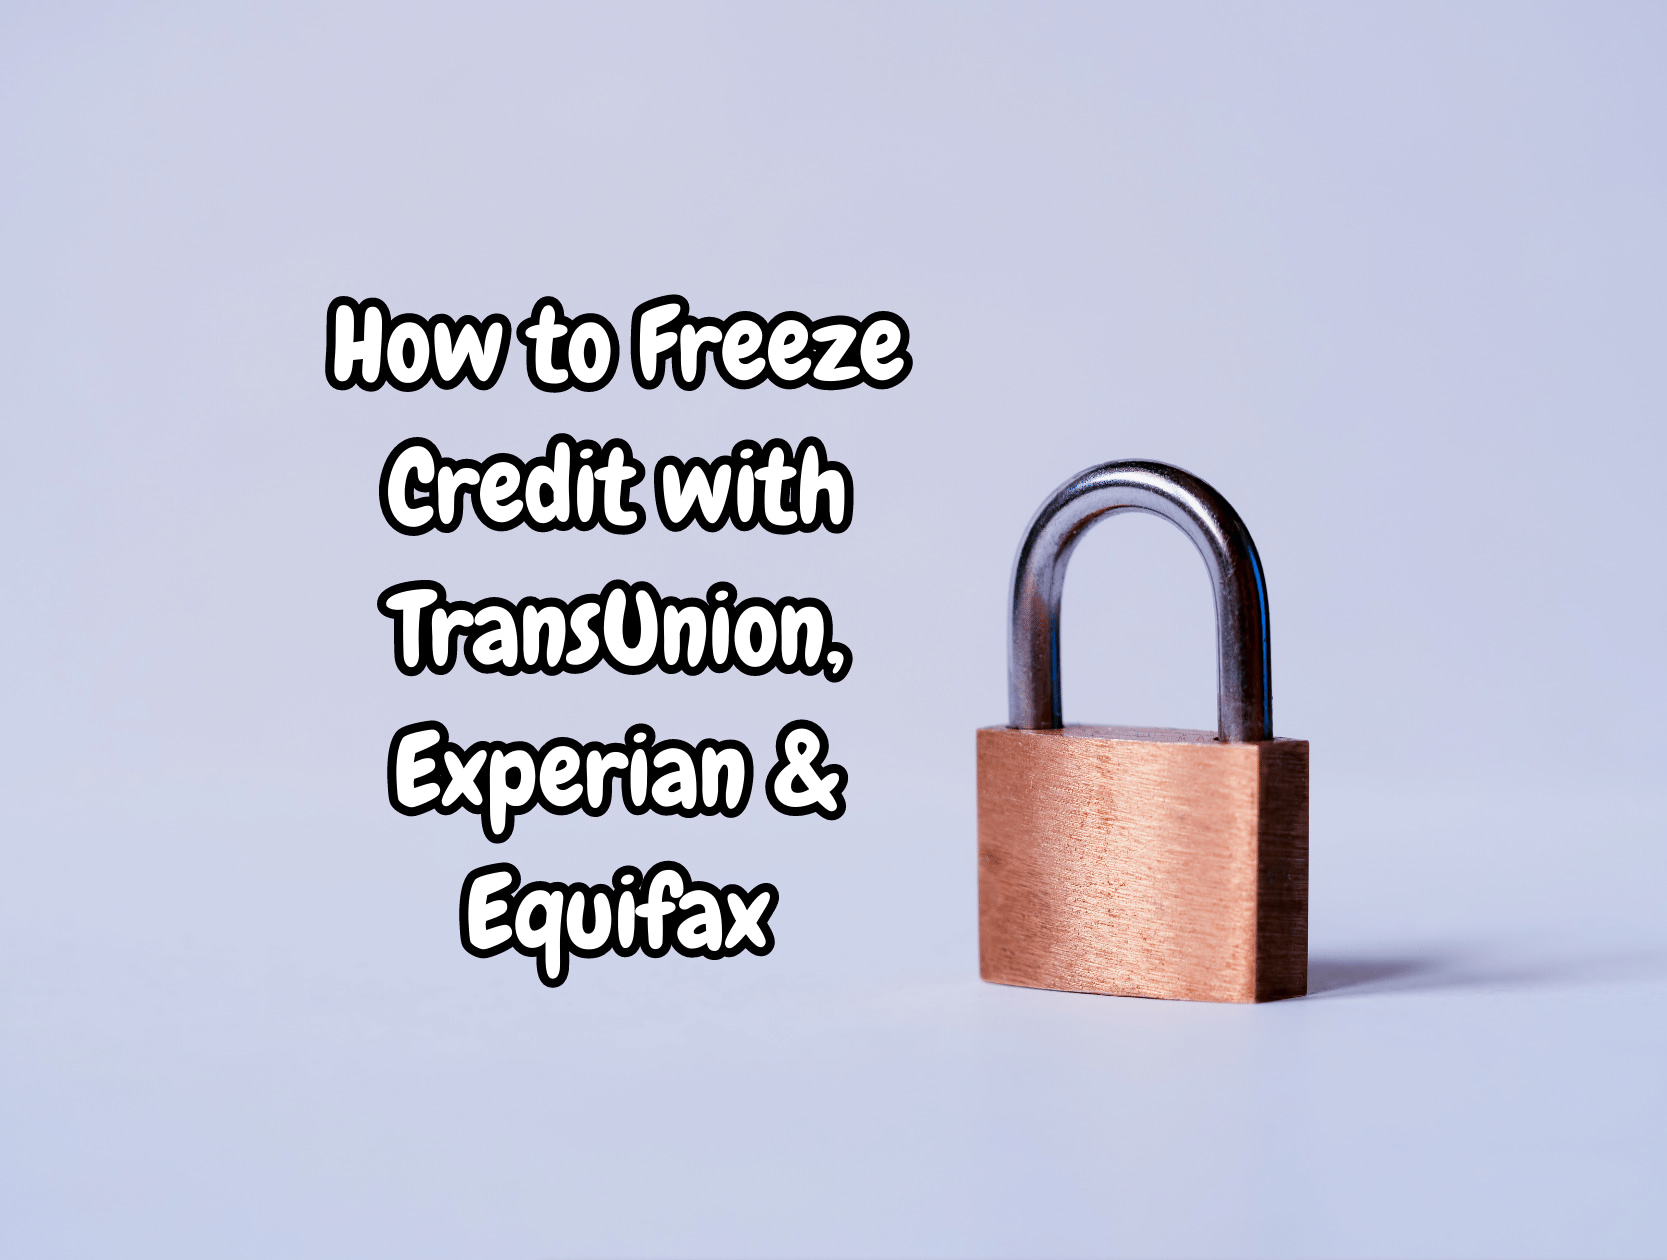 Steps to Place a Credit Freeze at TransUnion